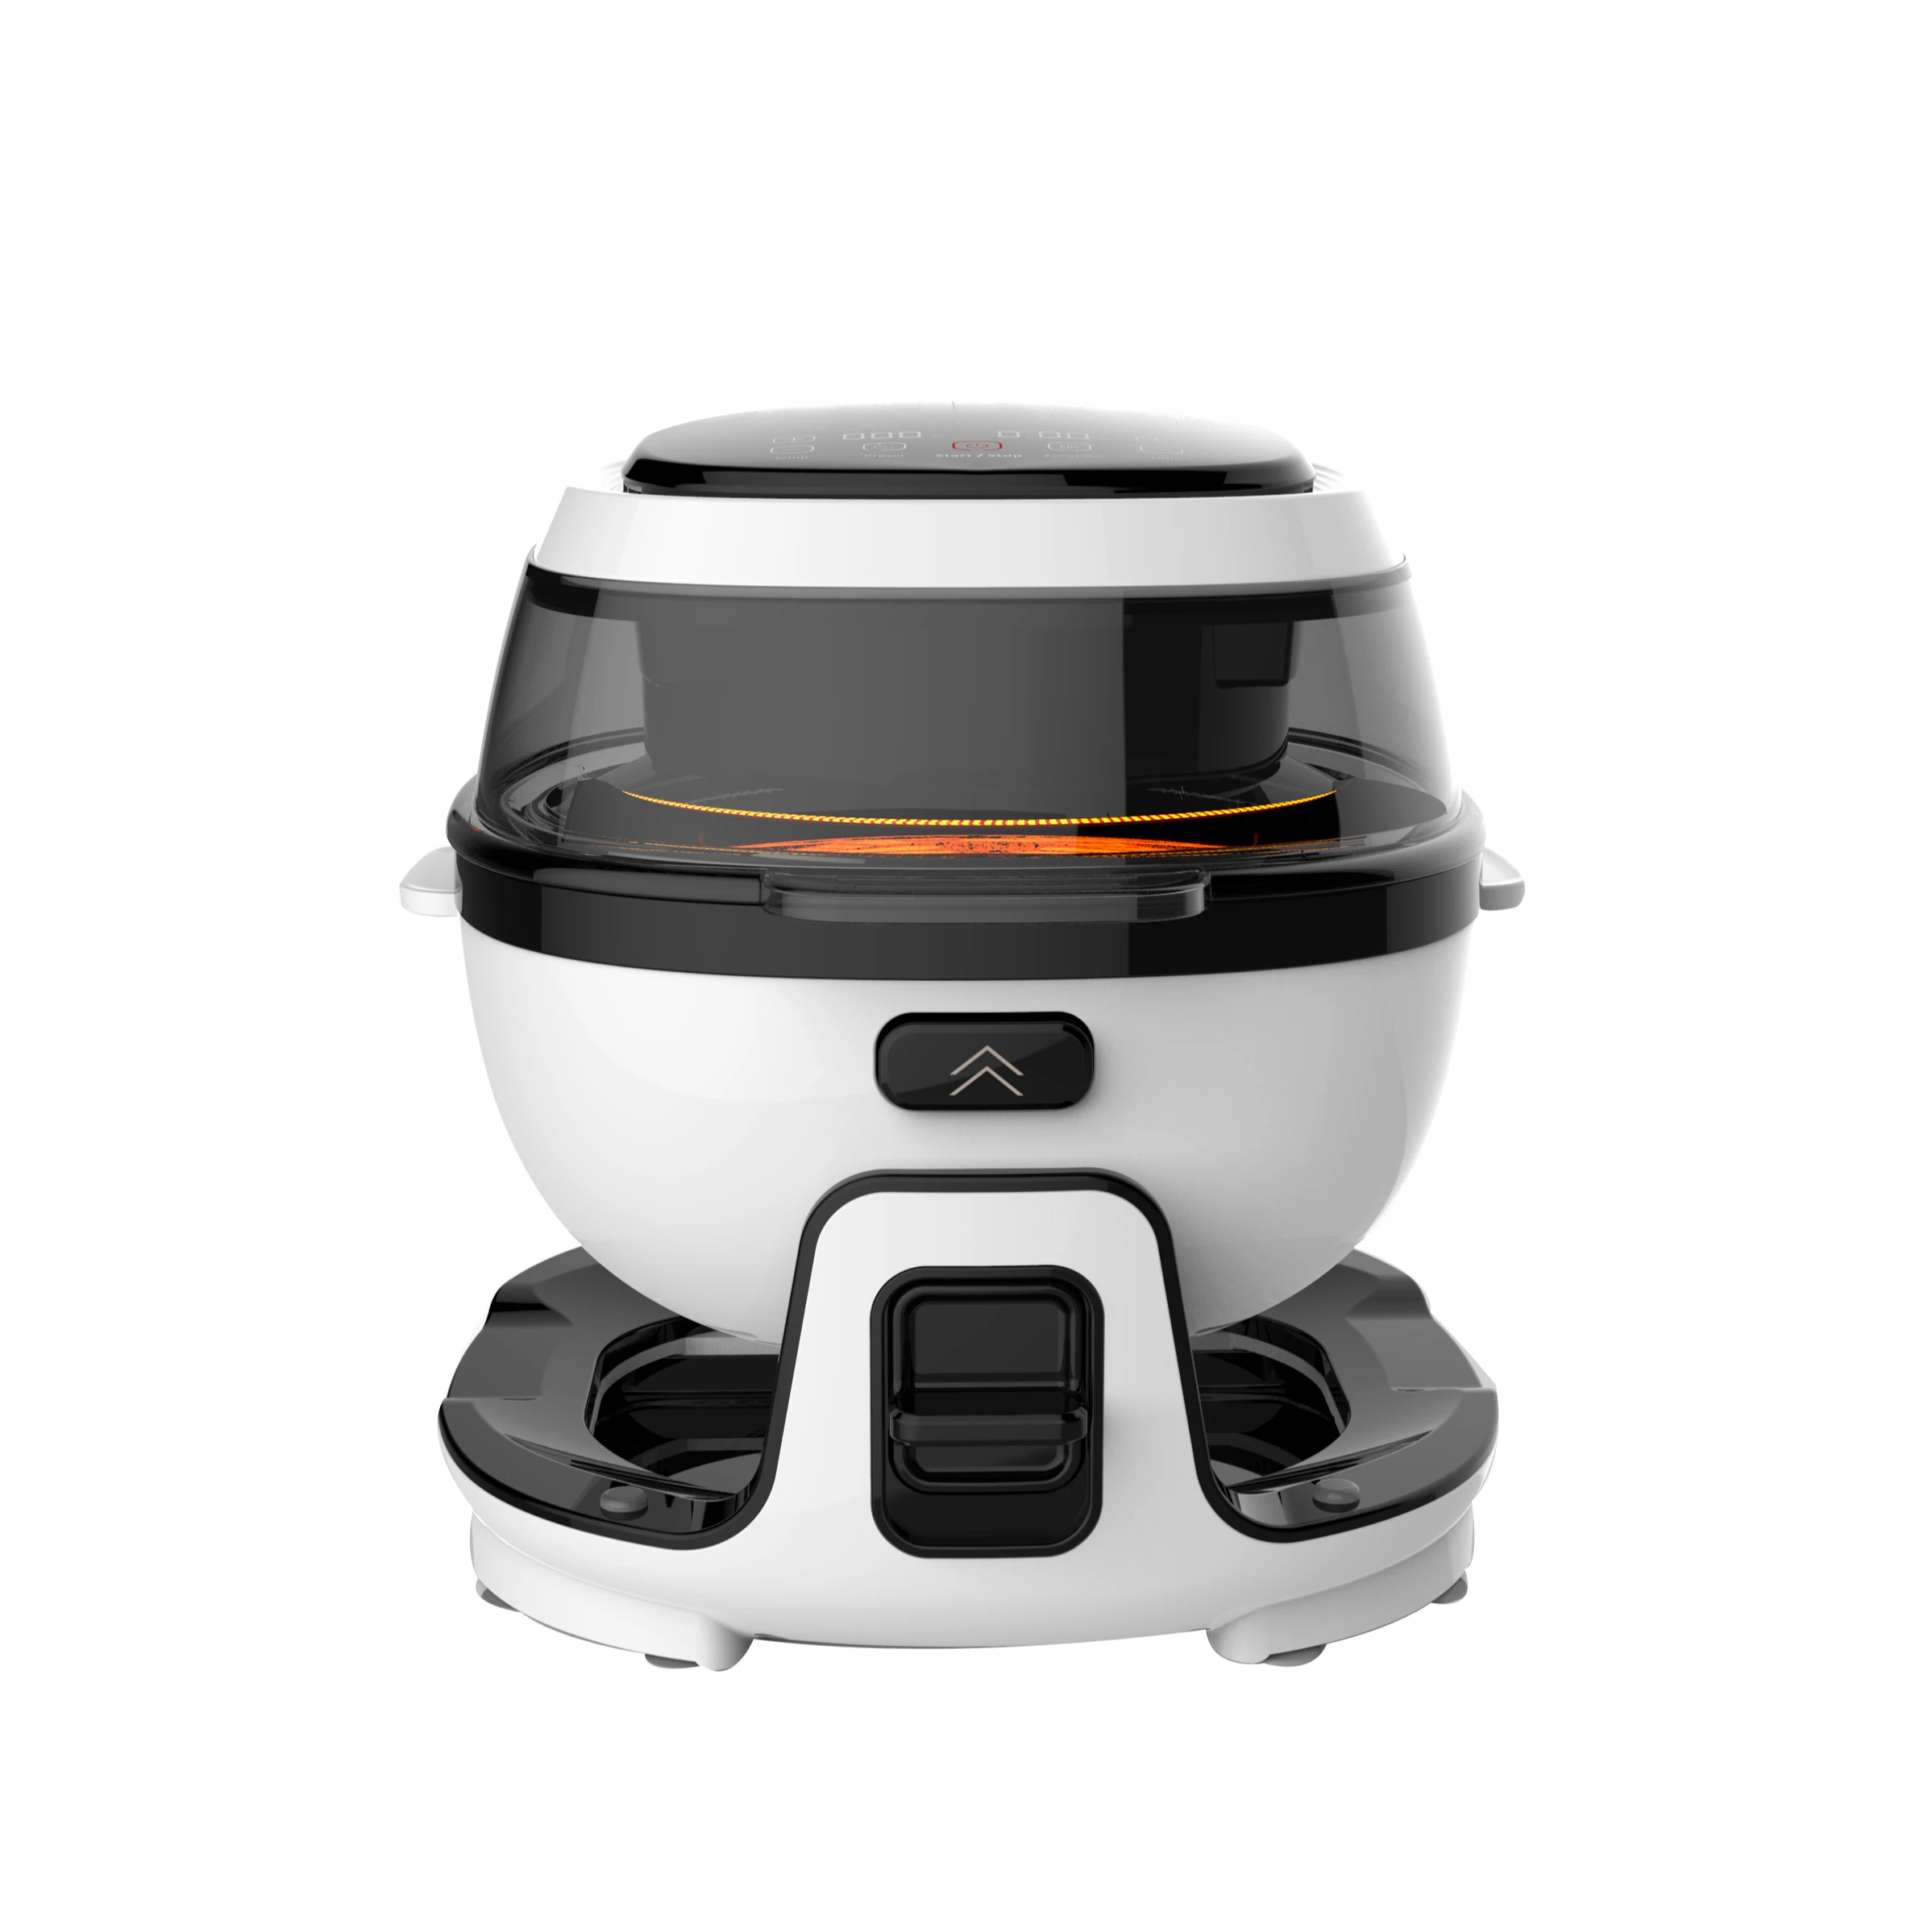 

Multifunction digital new design electrical cooker rolling air fryer oven